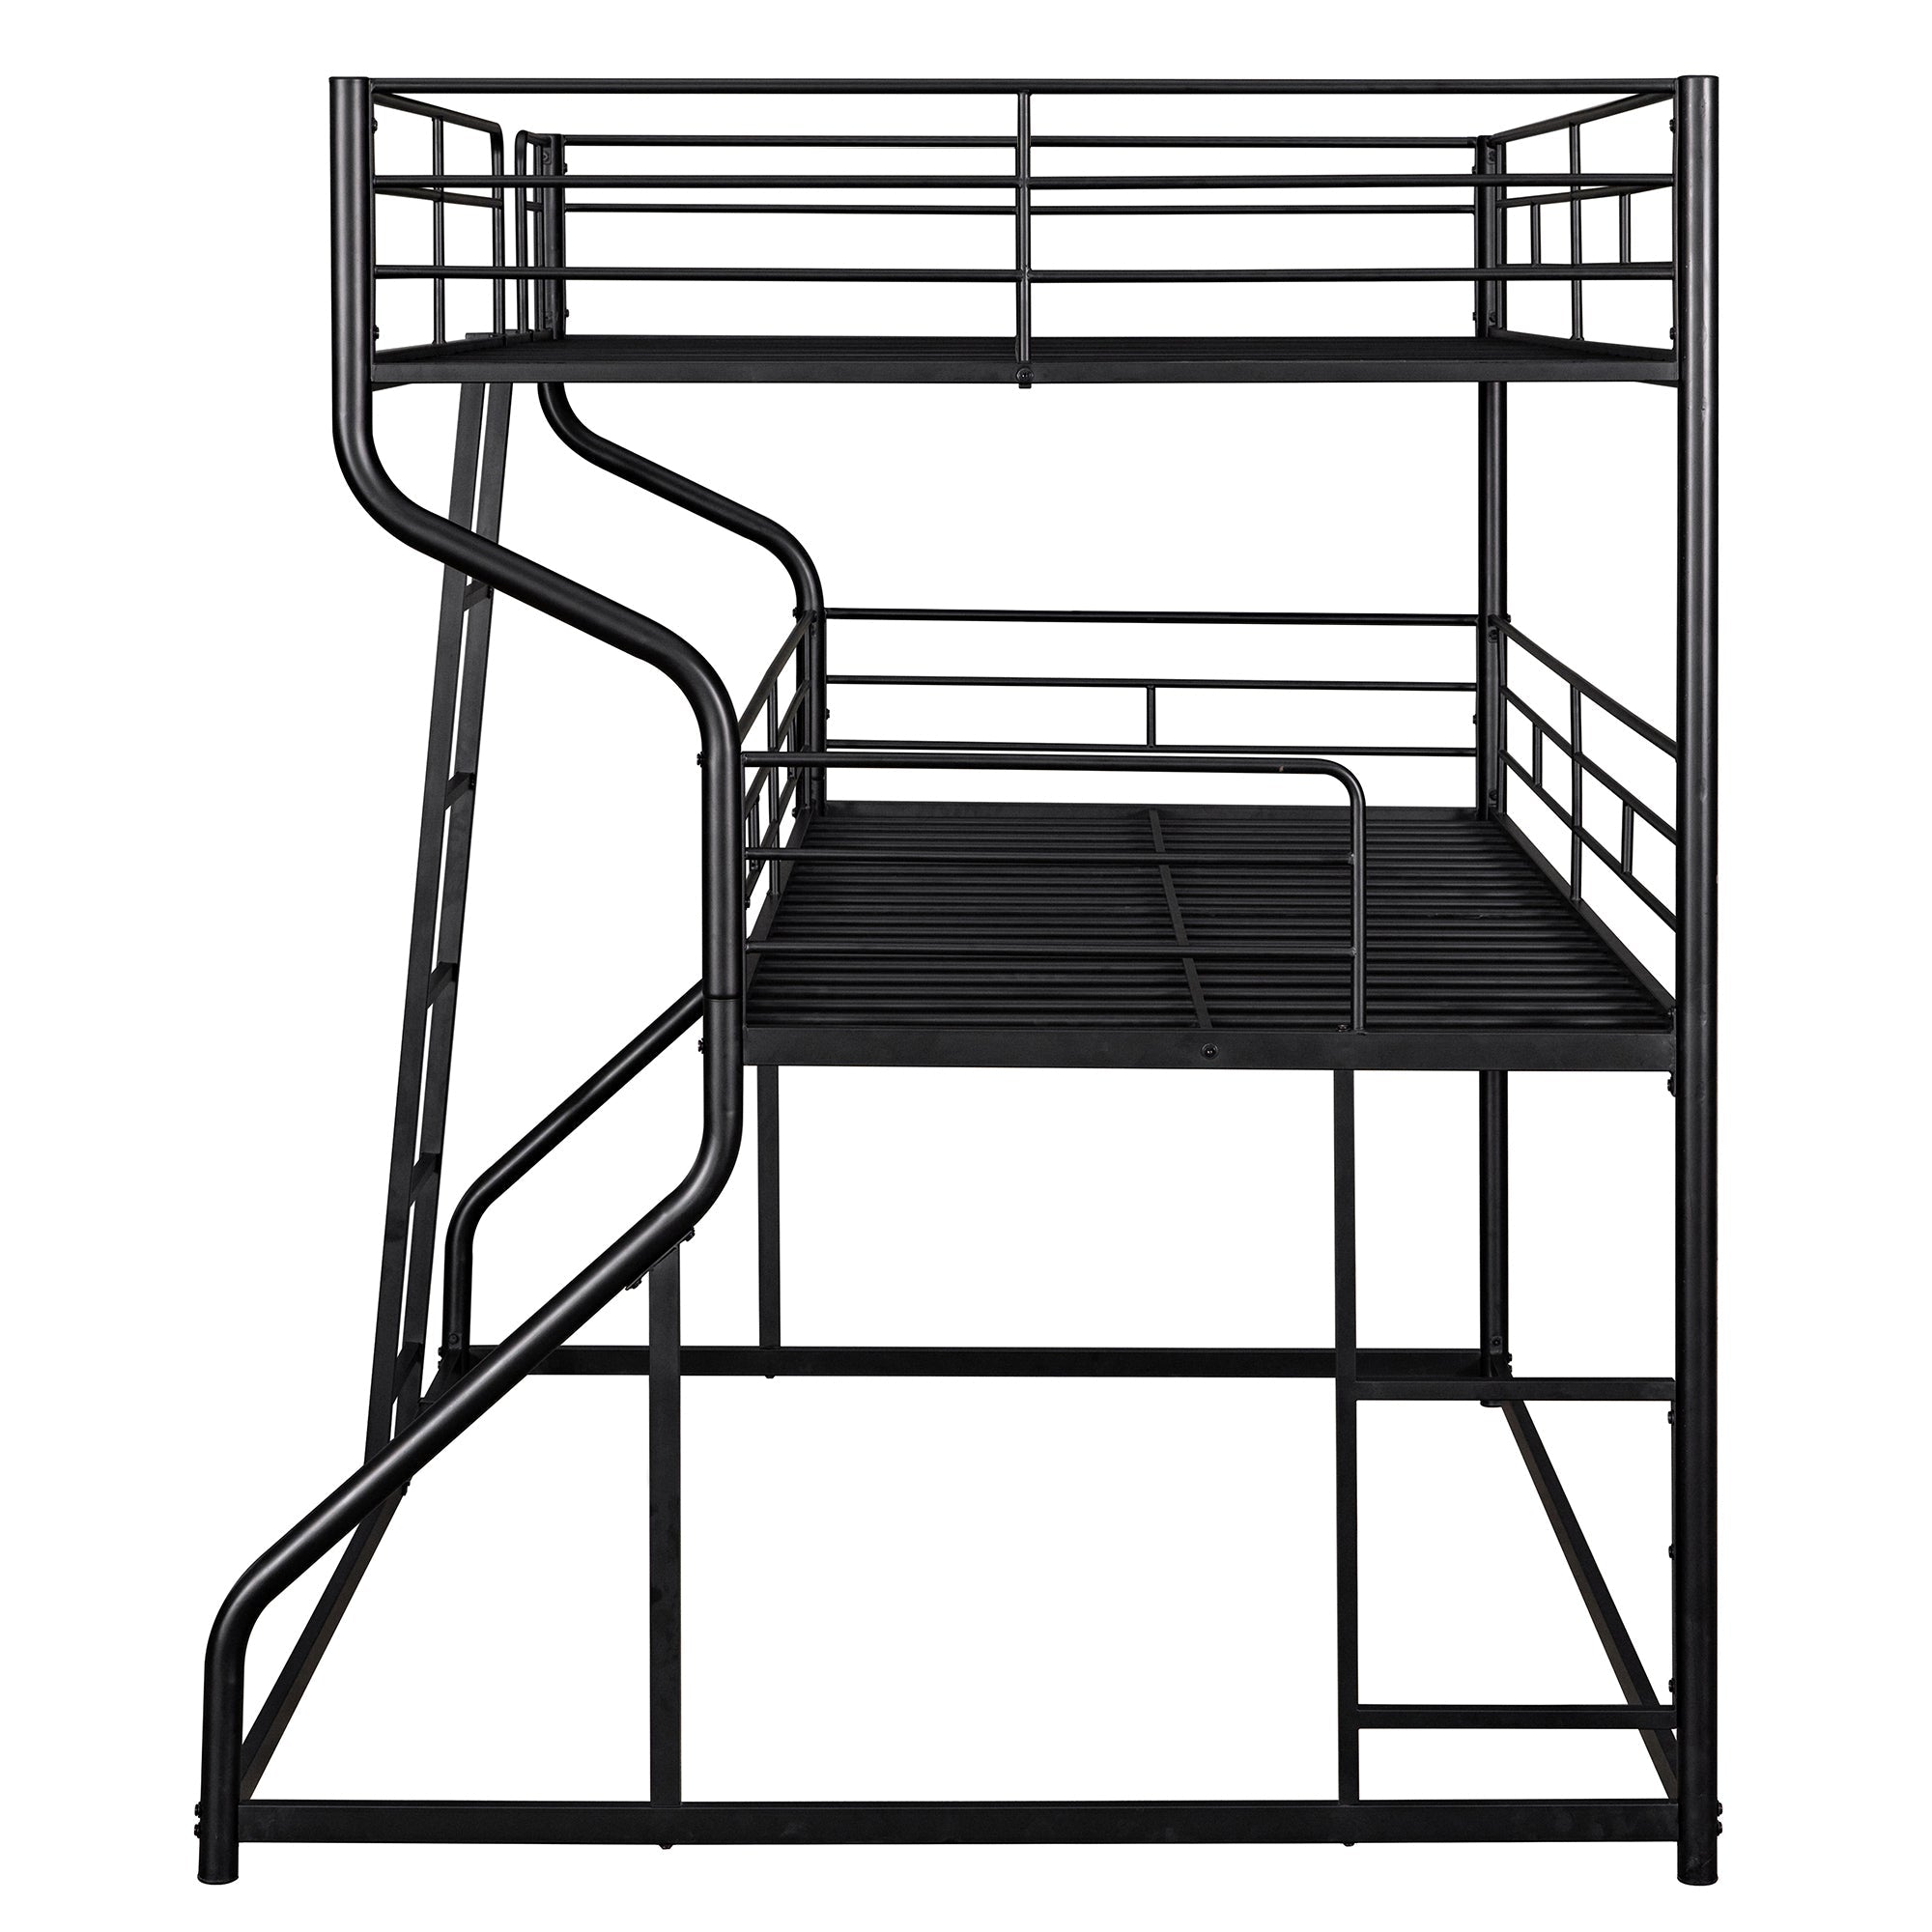 Black Full XL over Twin XL over Queen Size Triple Bunk Bed with Long and Short Ladder